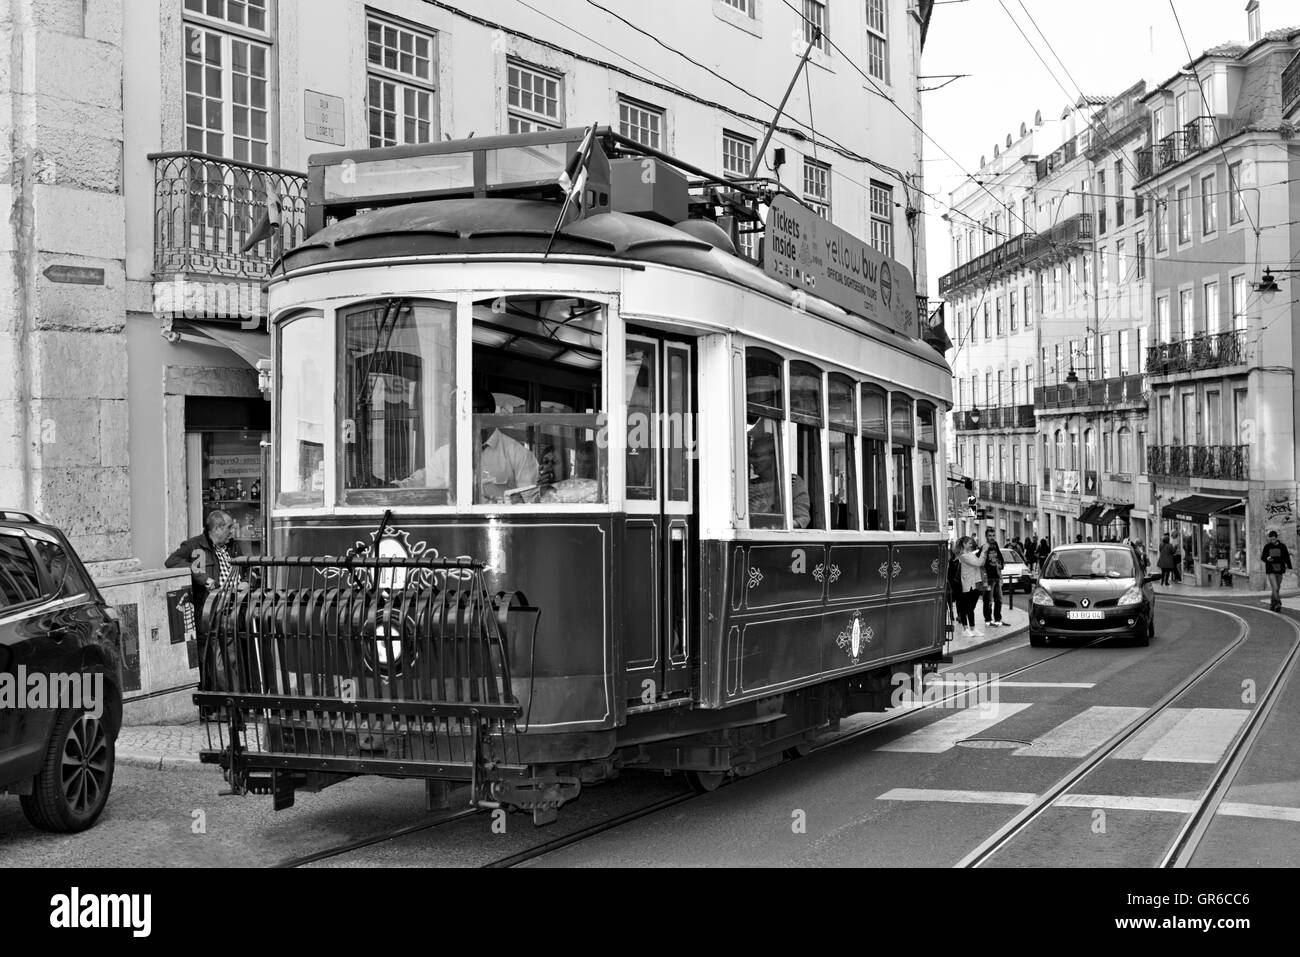 Portugal, Lisbon: Historic tram in the streets of downtown Lisbon (bw) Stock Photo